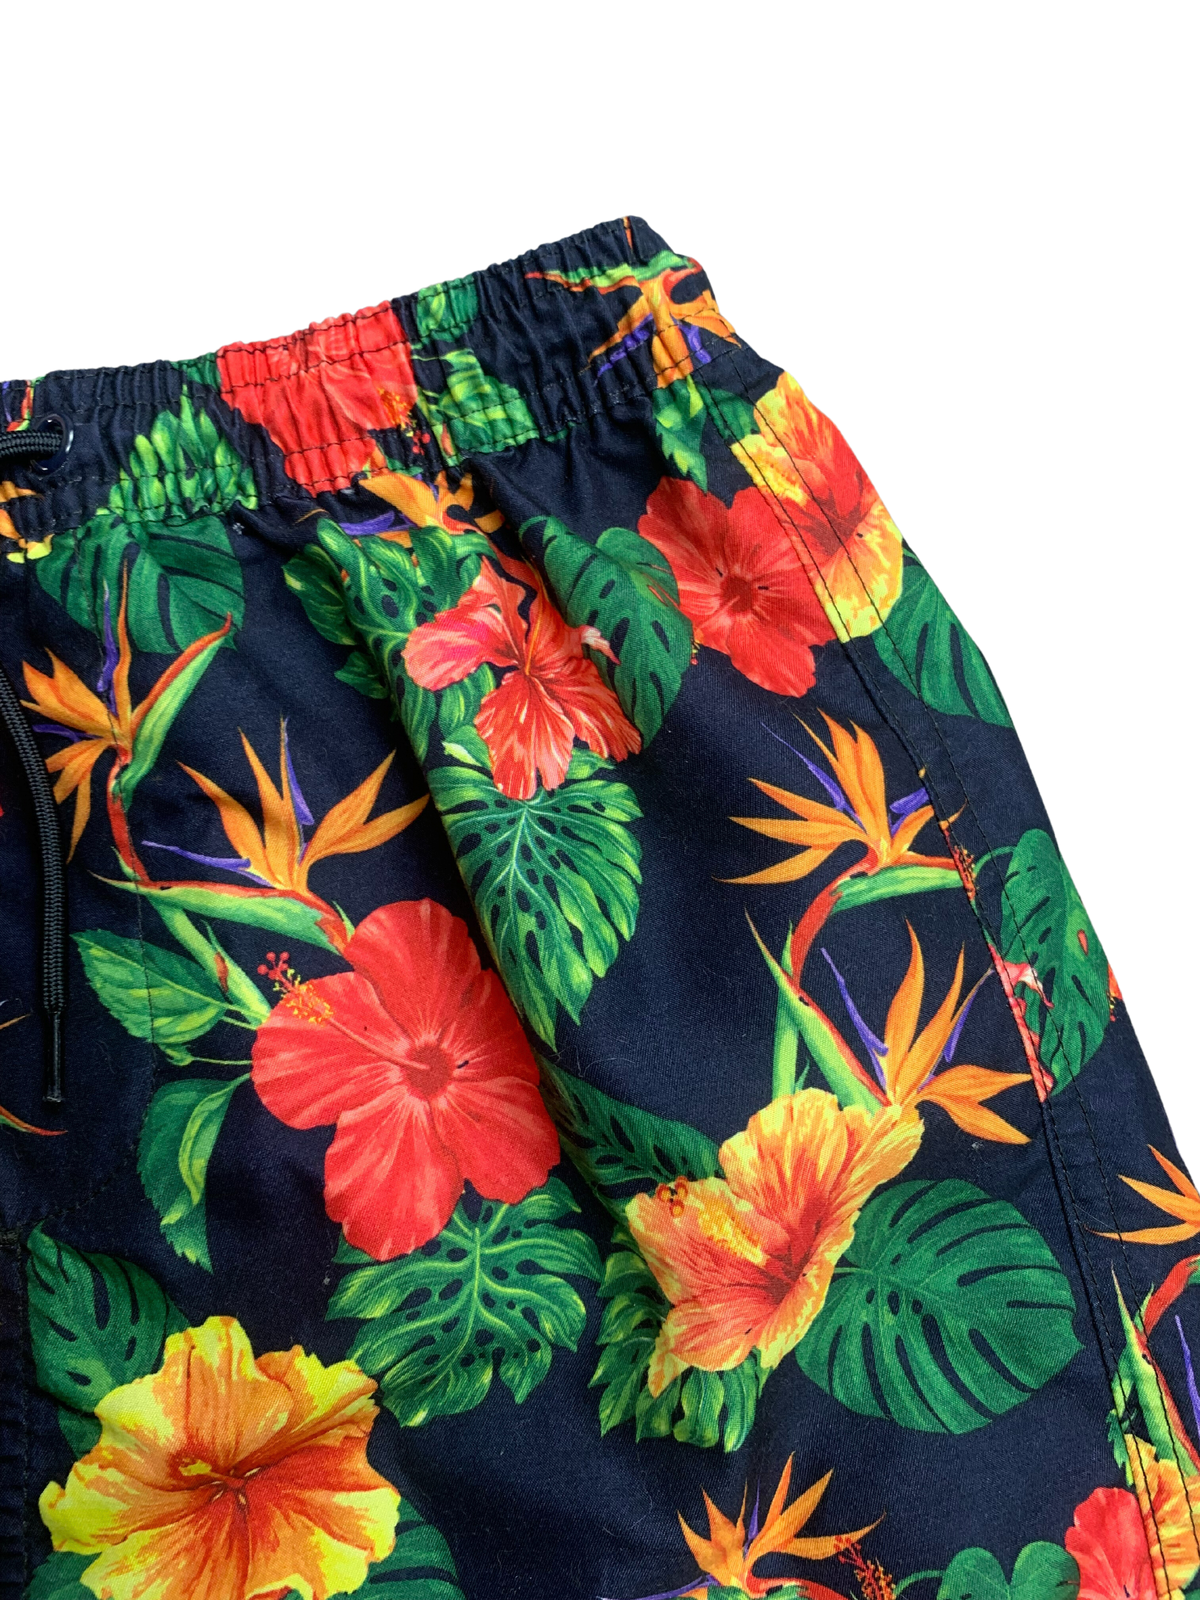 Cool Vibes Floral Shorts Boys 10-11 Years